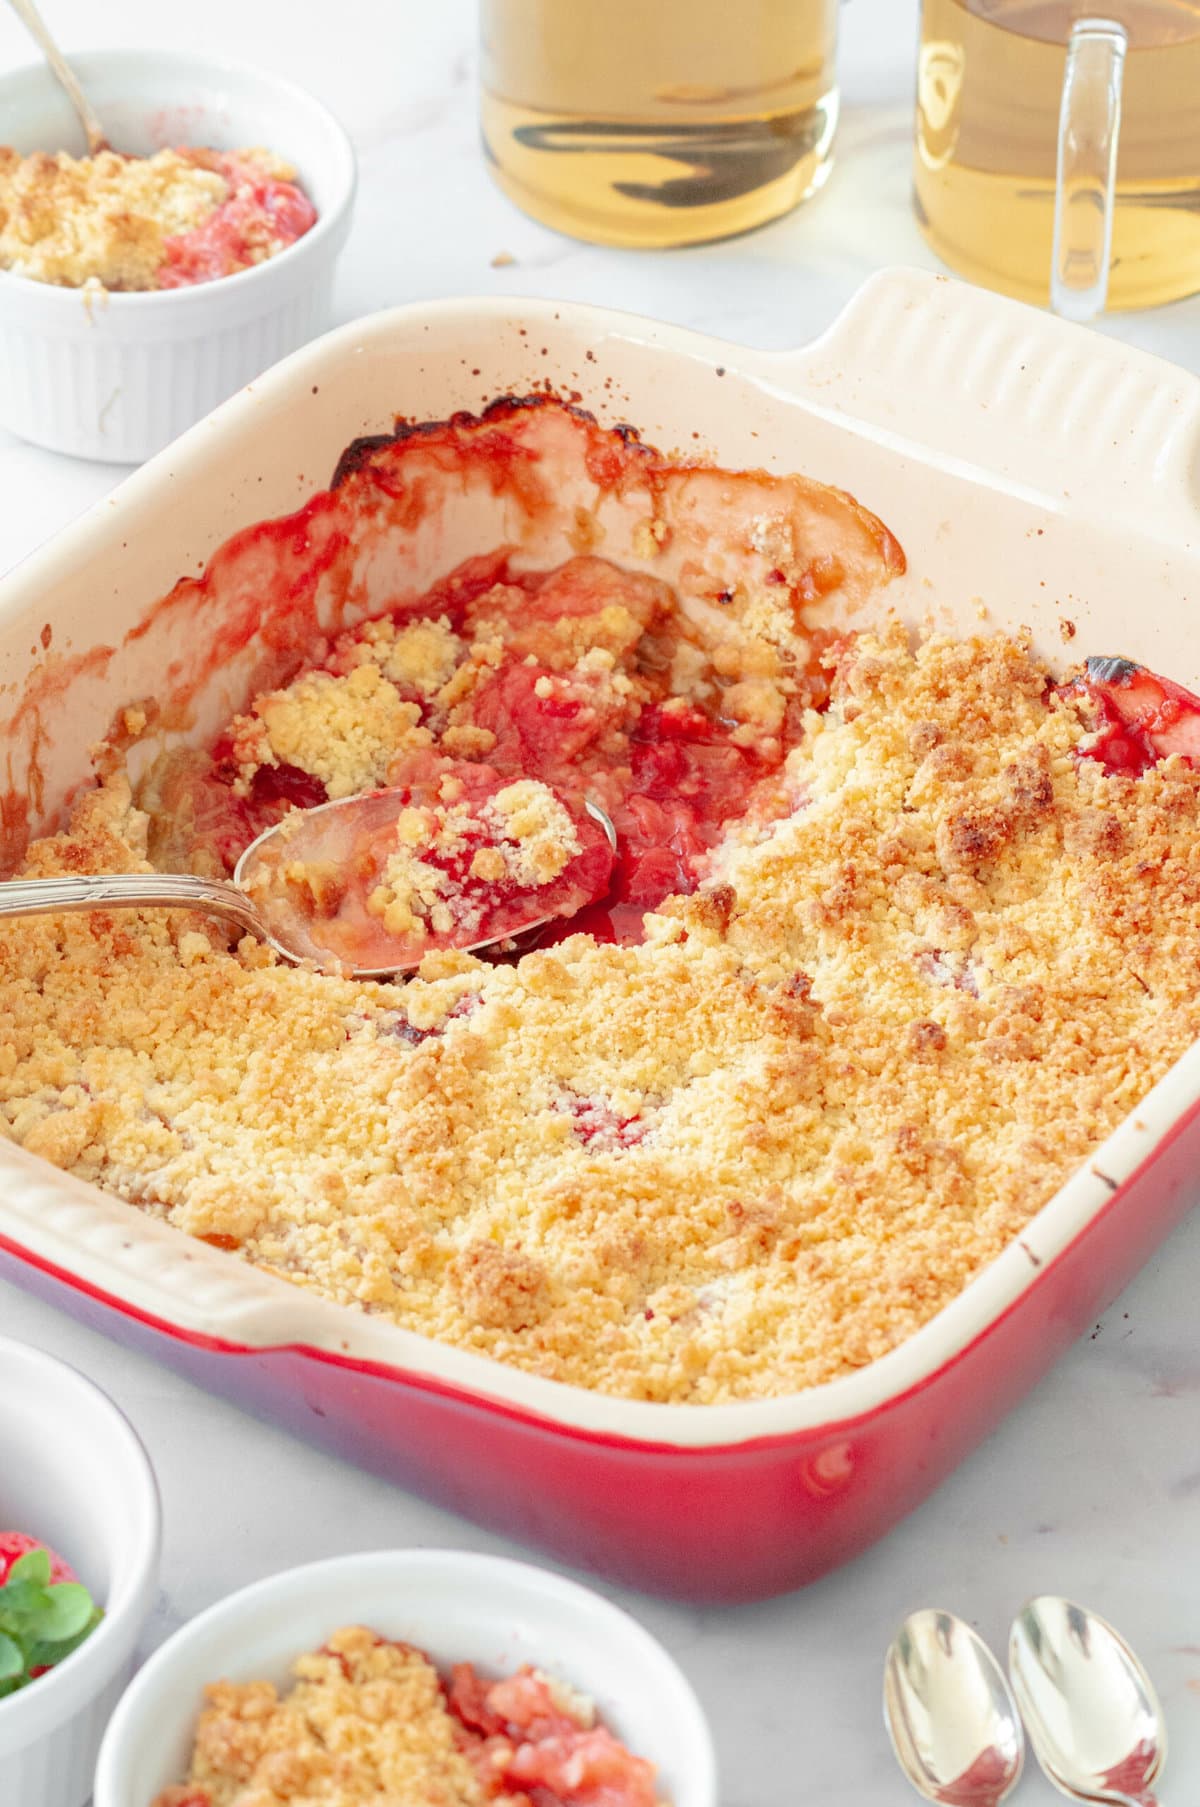 Strawberry and rhubarb crumble in a dish with tea and strawberries in a bowl.